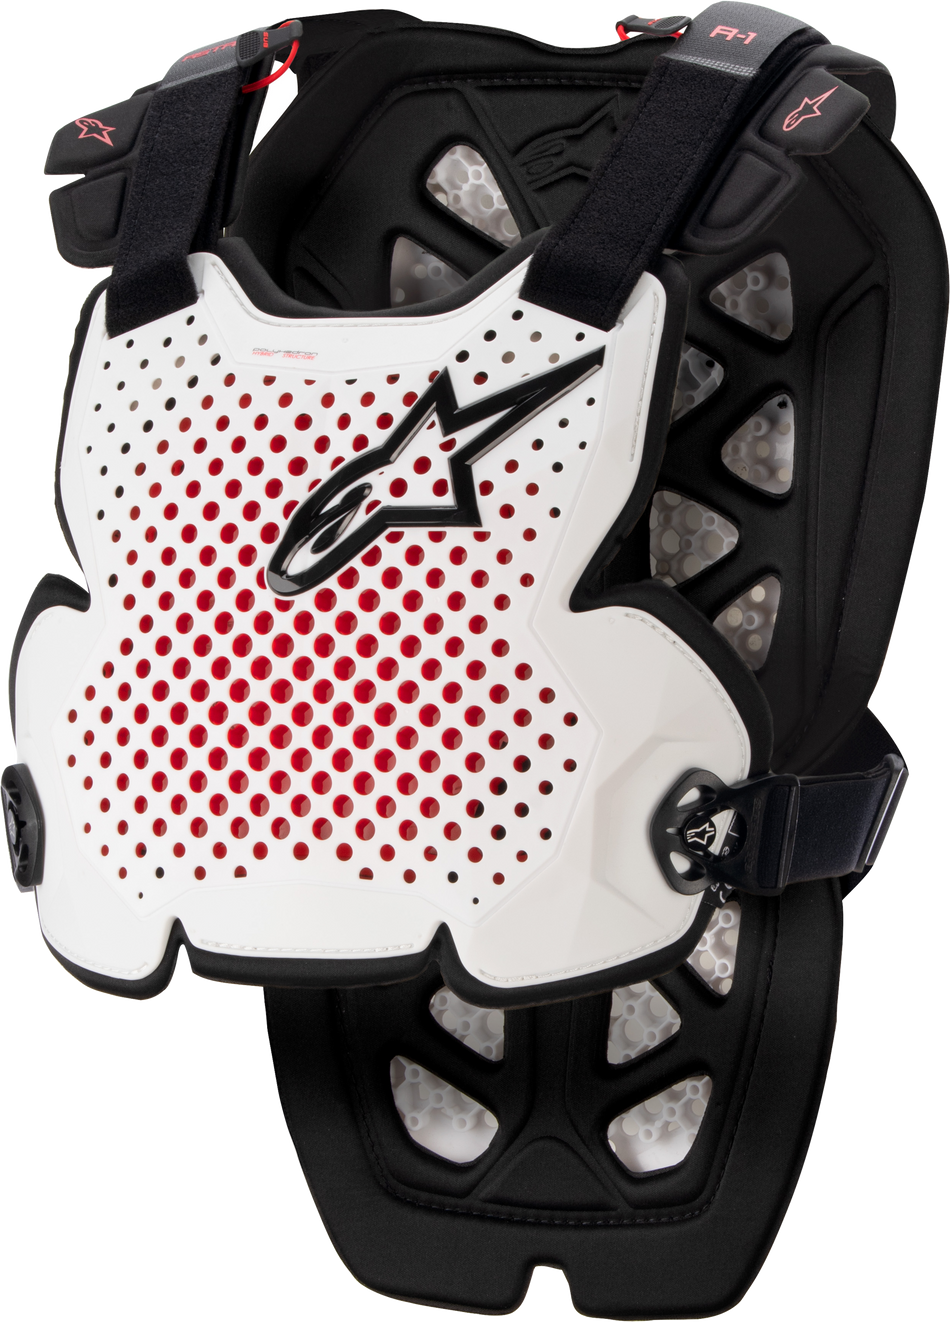 ALPINESTARS A-1 Chest Protector White/Black/Red Md/Lg 6700123-213-M/L